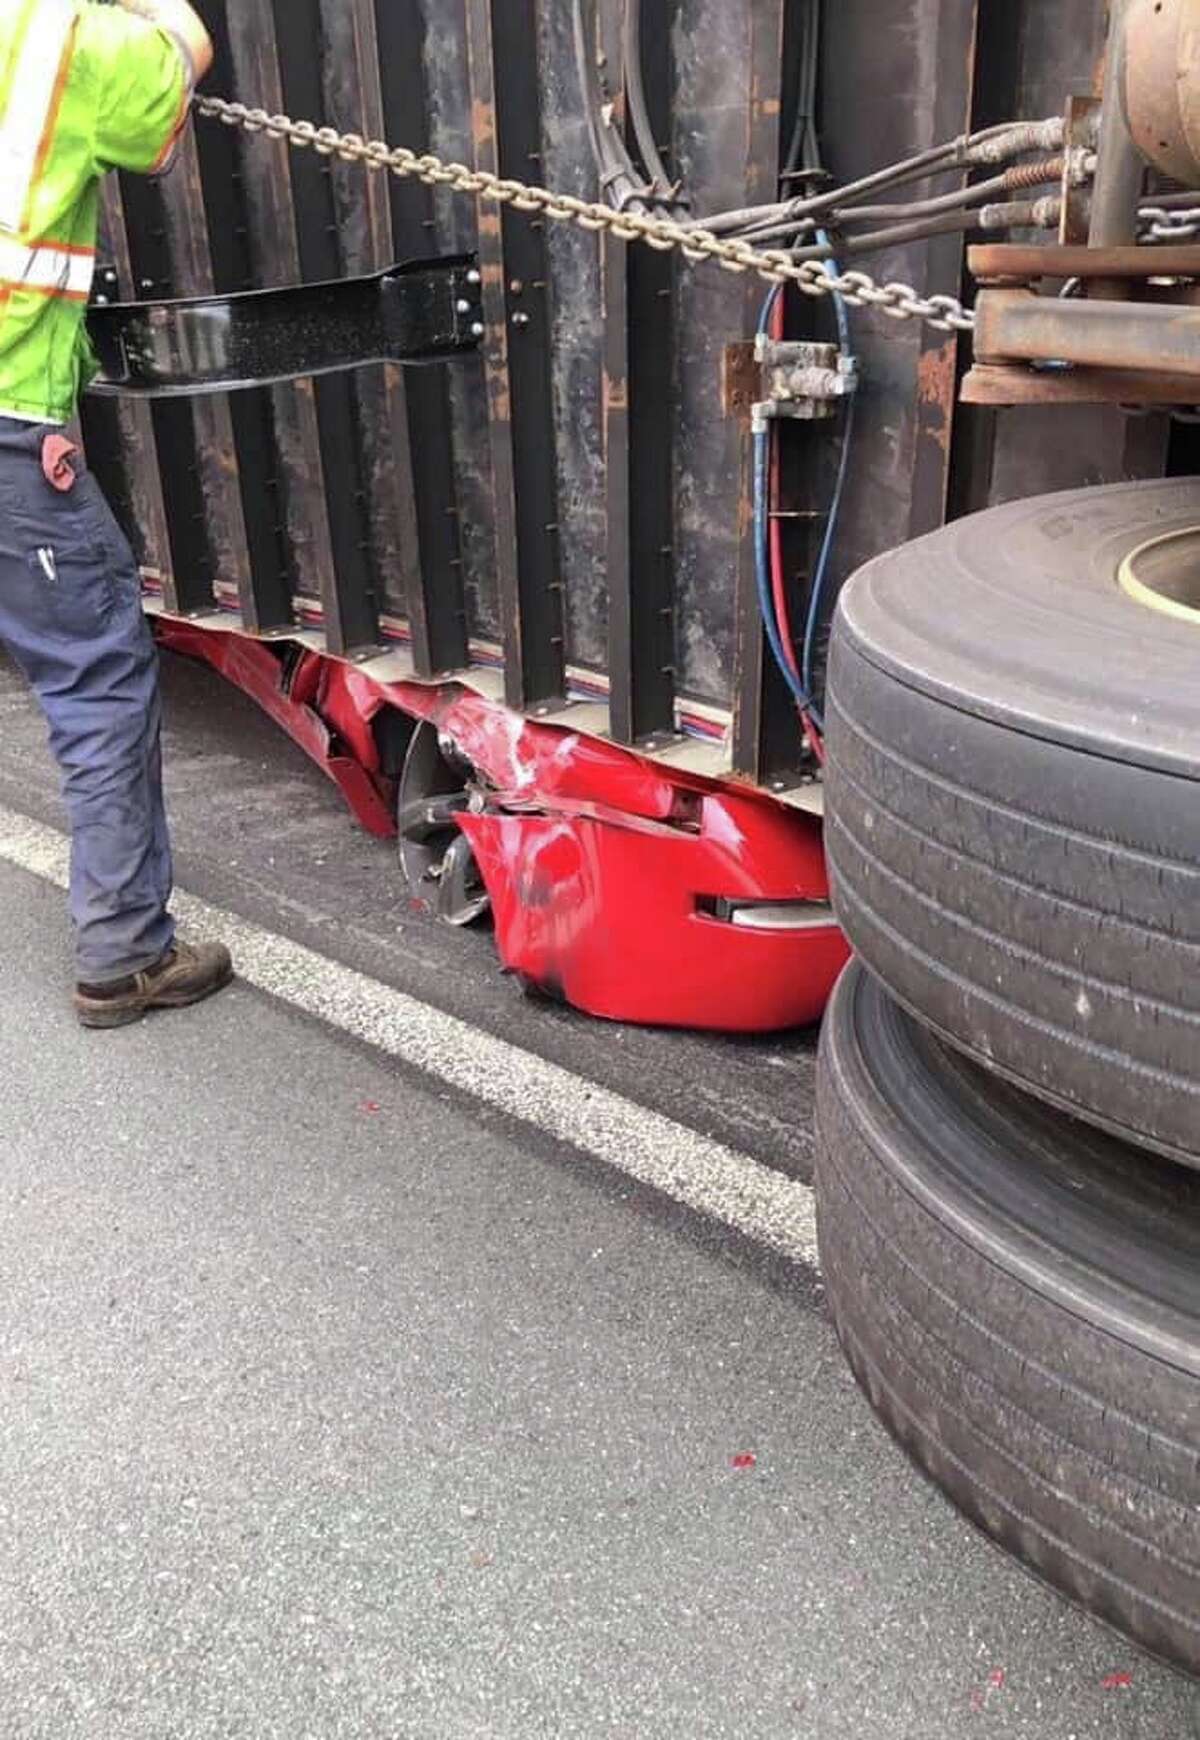 A Sept. 25, 2019, crash on Interstate 787 in Watervliet, N.Y., crushed a car under a tractor trailer and forced police to close all northbound lanes of the highway.